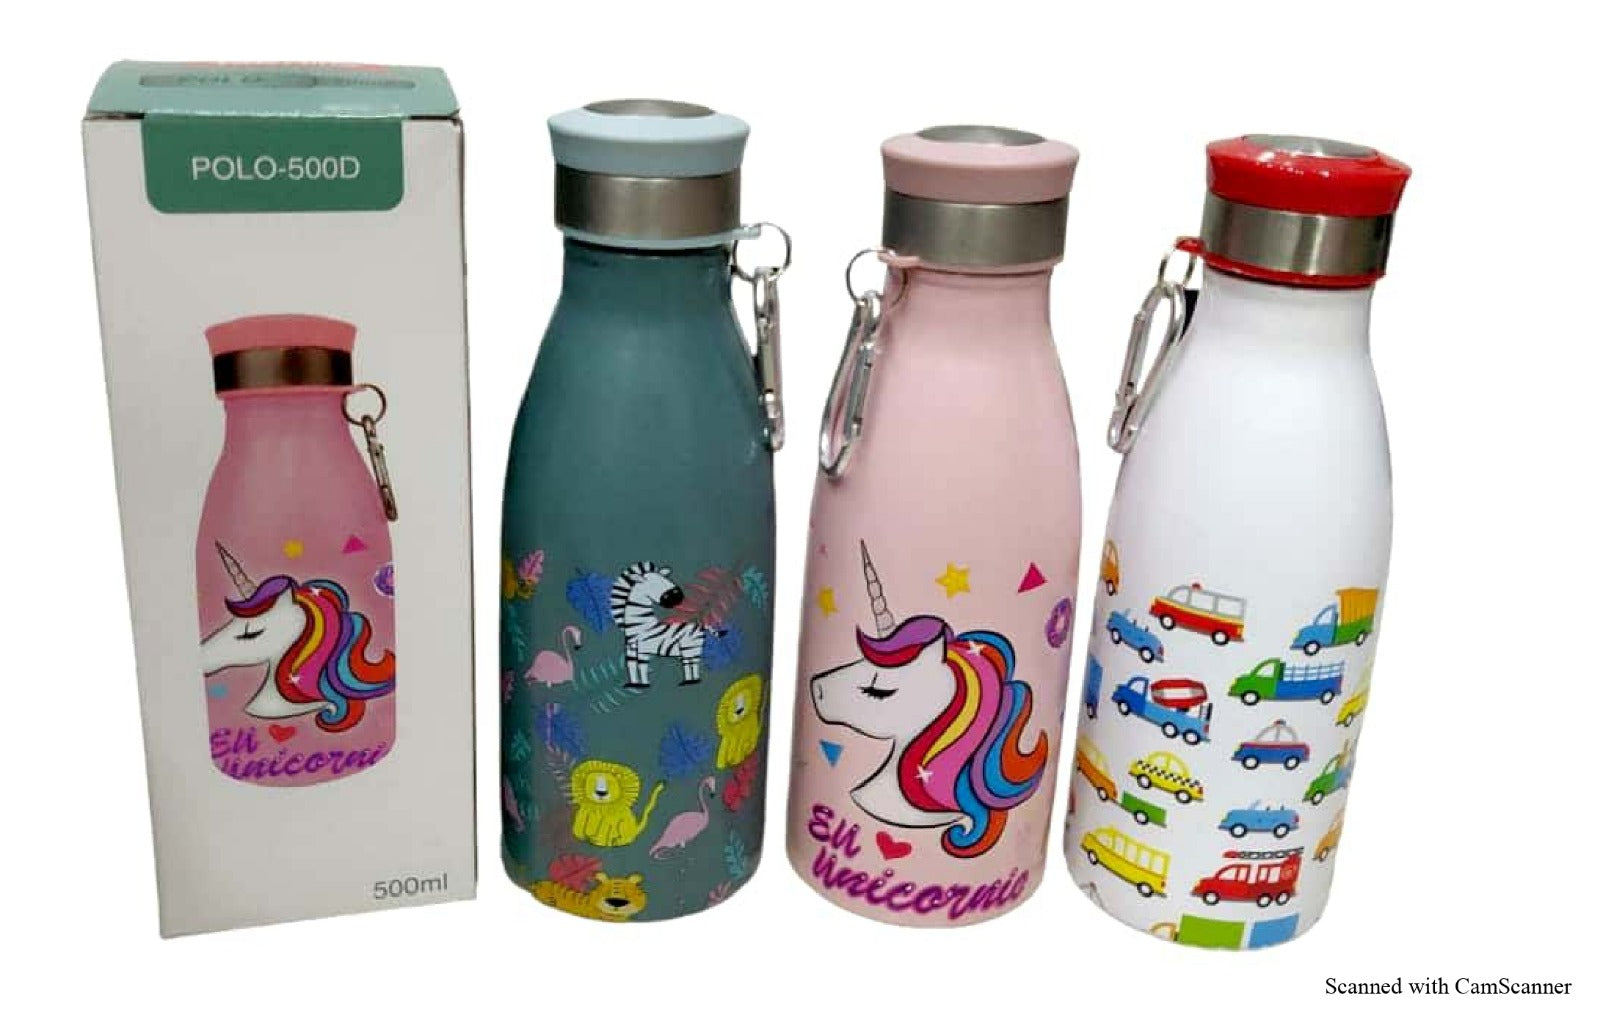 TAG Hills Polo 500 D Stainless Steel Water Bottle Set of 3, Multicolour Cartoon print Each 500ml-Home & Kitchen Appliances-dealsplant